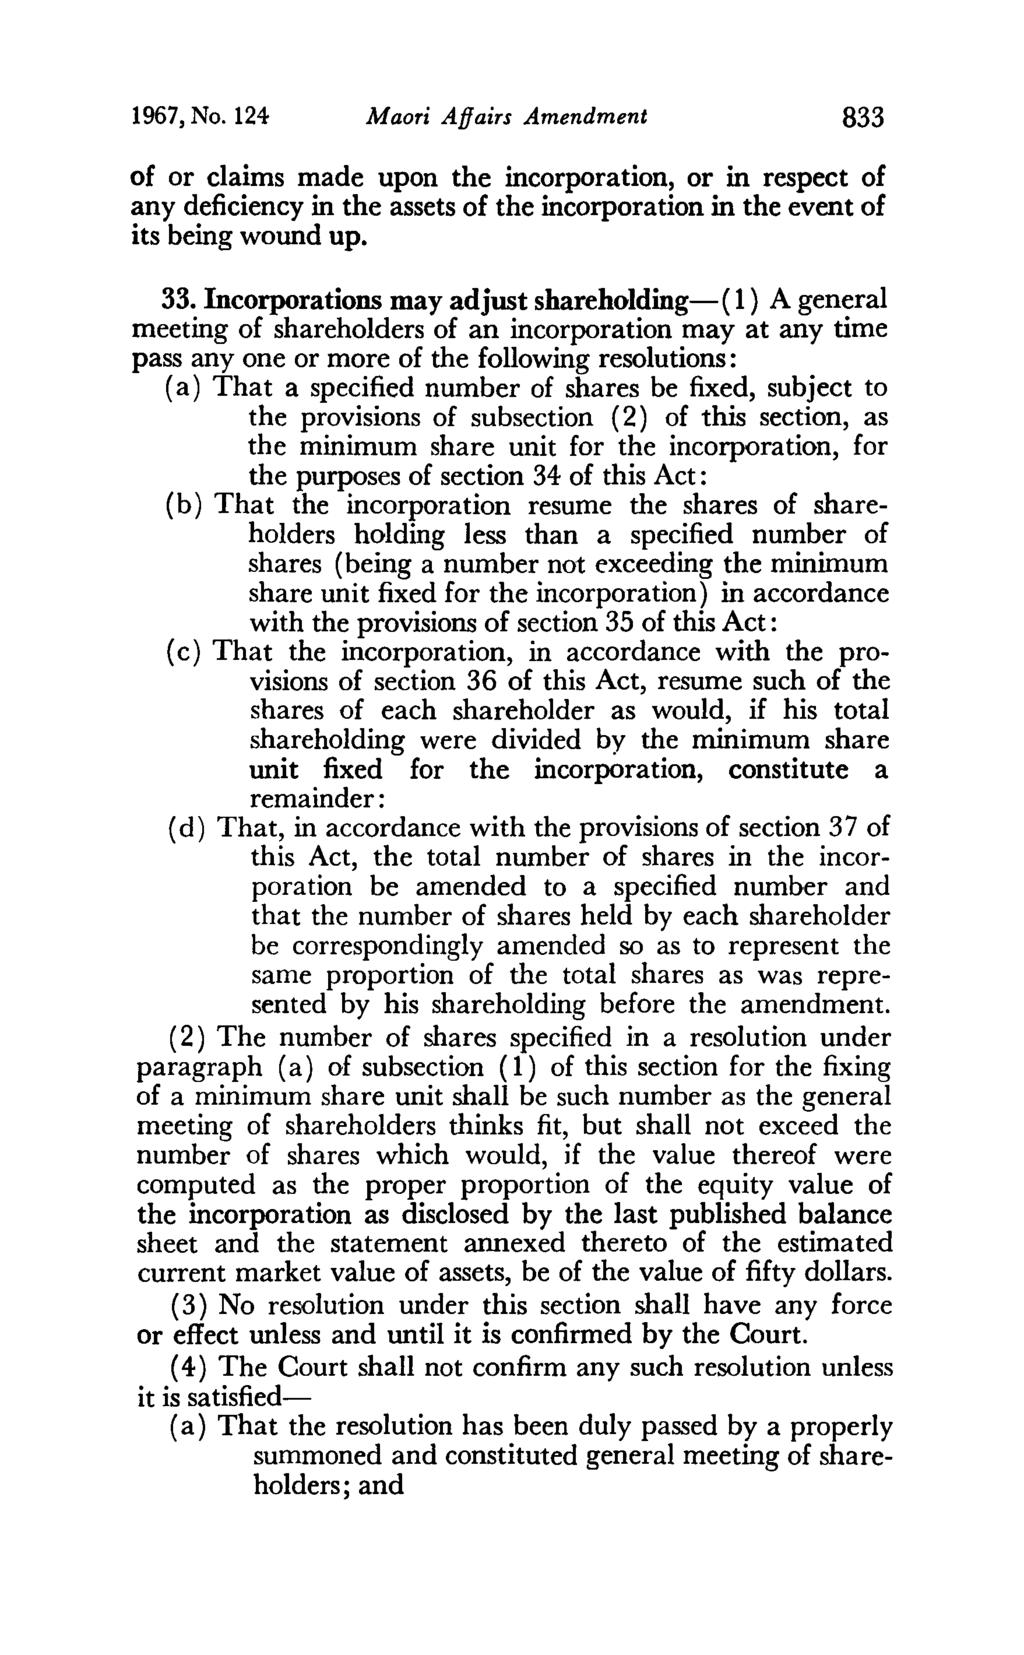 1967, No. 124 Maori Affairs Amendment 833 of or claims made upon the incorporation, or in respect of any deficiency in the assets of the incorporation in the event of its being wound up. 33.